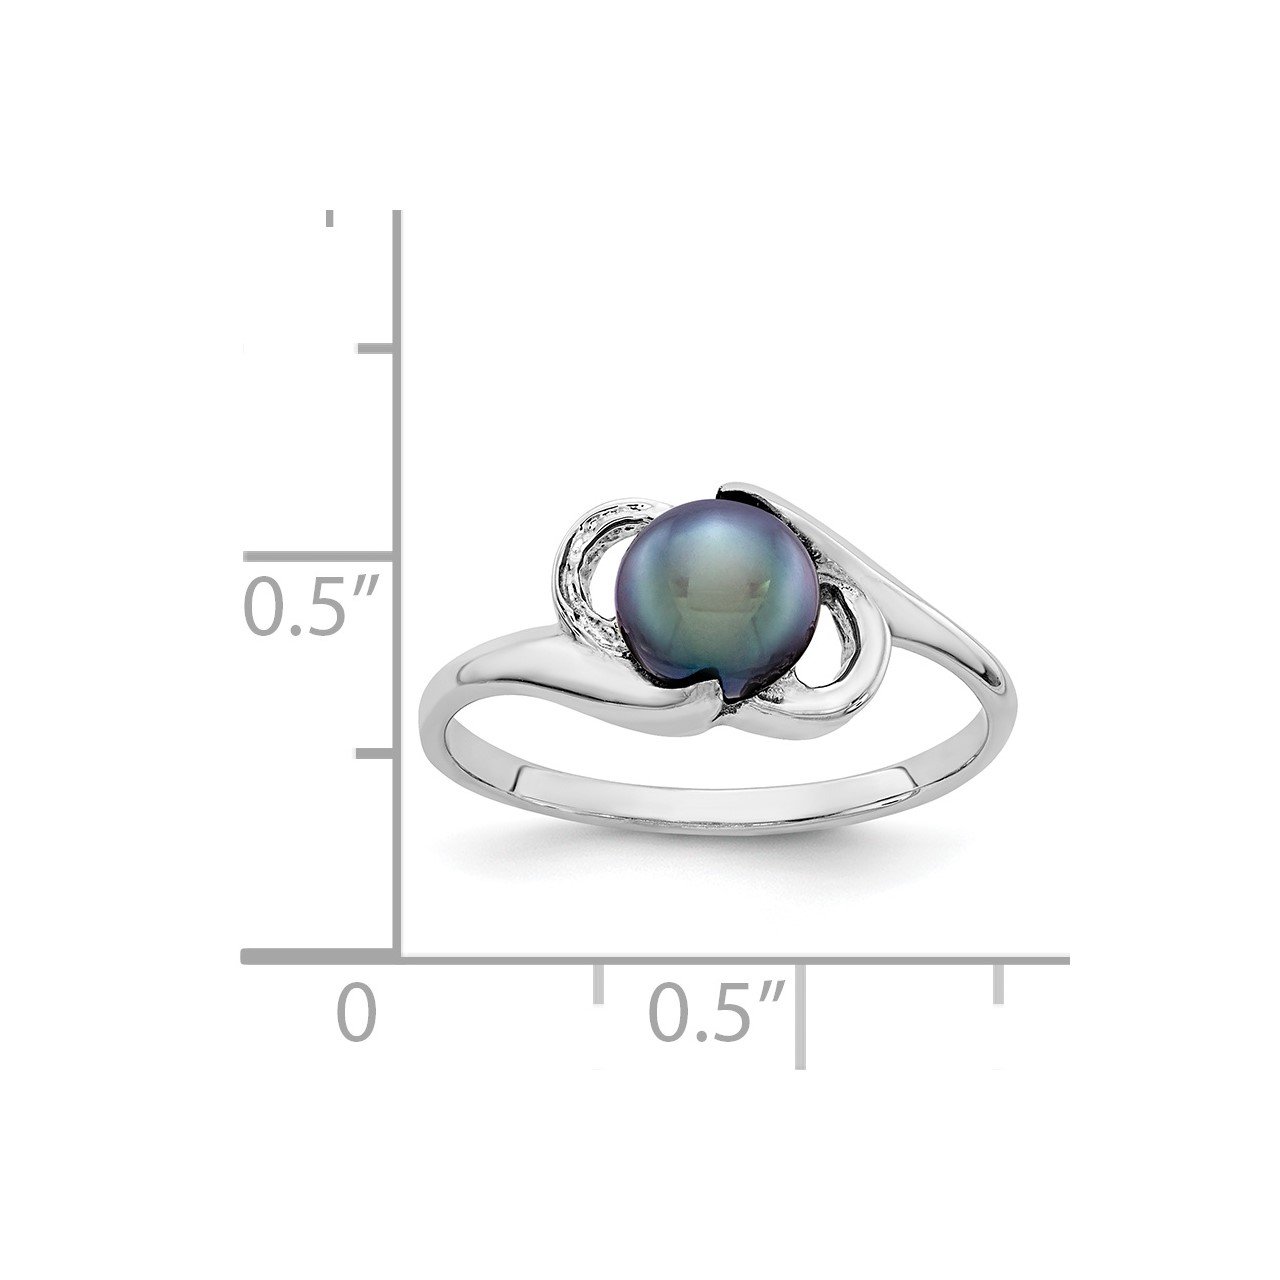 14k White Gold 5.5mm Black FW Cultured Pearl ring-4